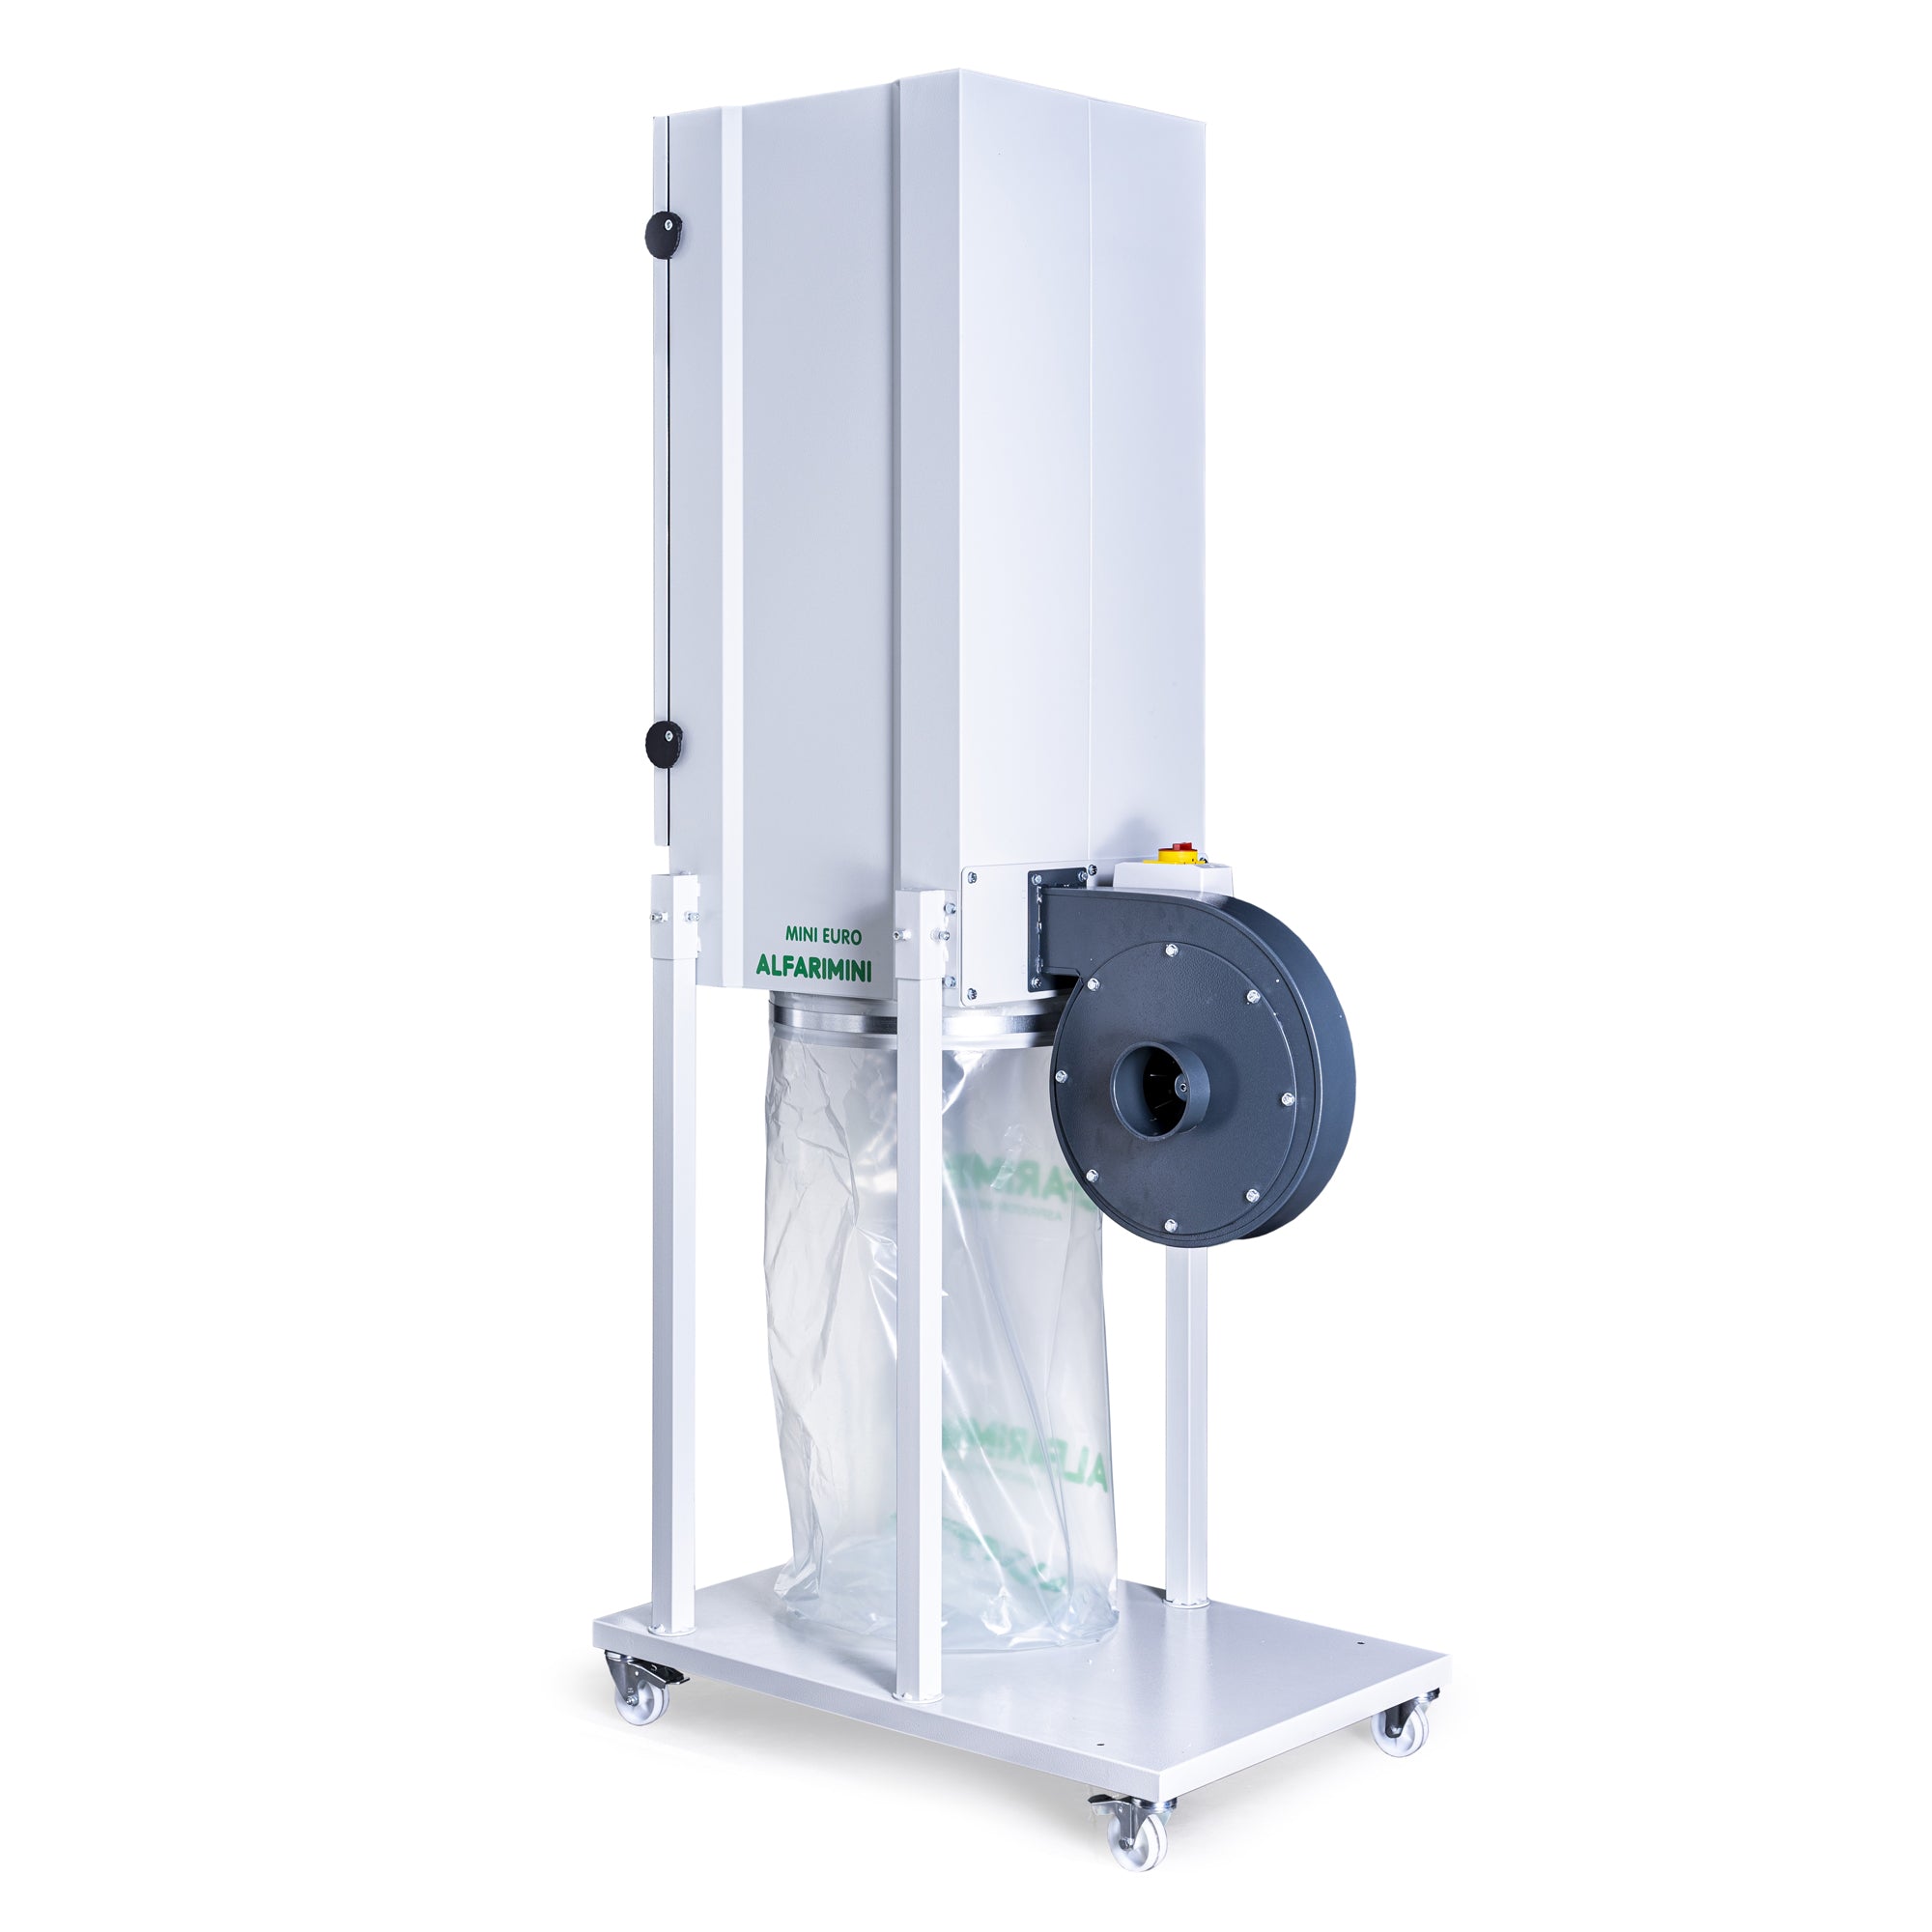 Industrial Dust Collector / Extractor with High Pressure Fan 2HP Mini Euro - HPF 35 by Alfarimini